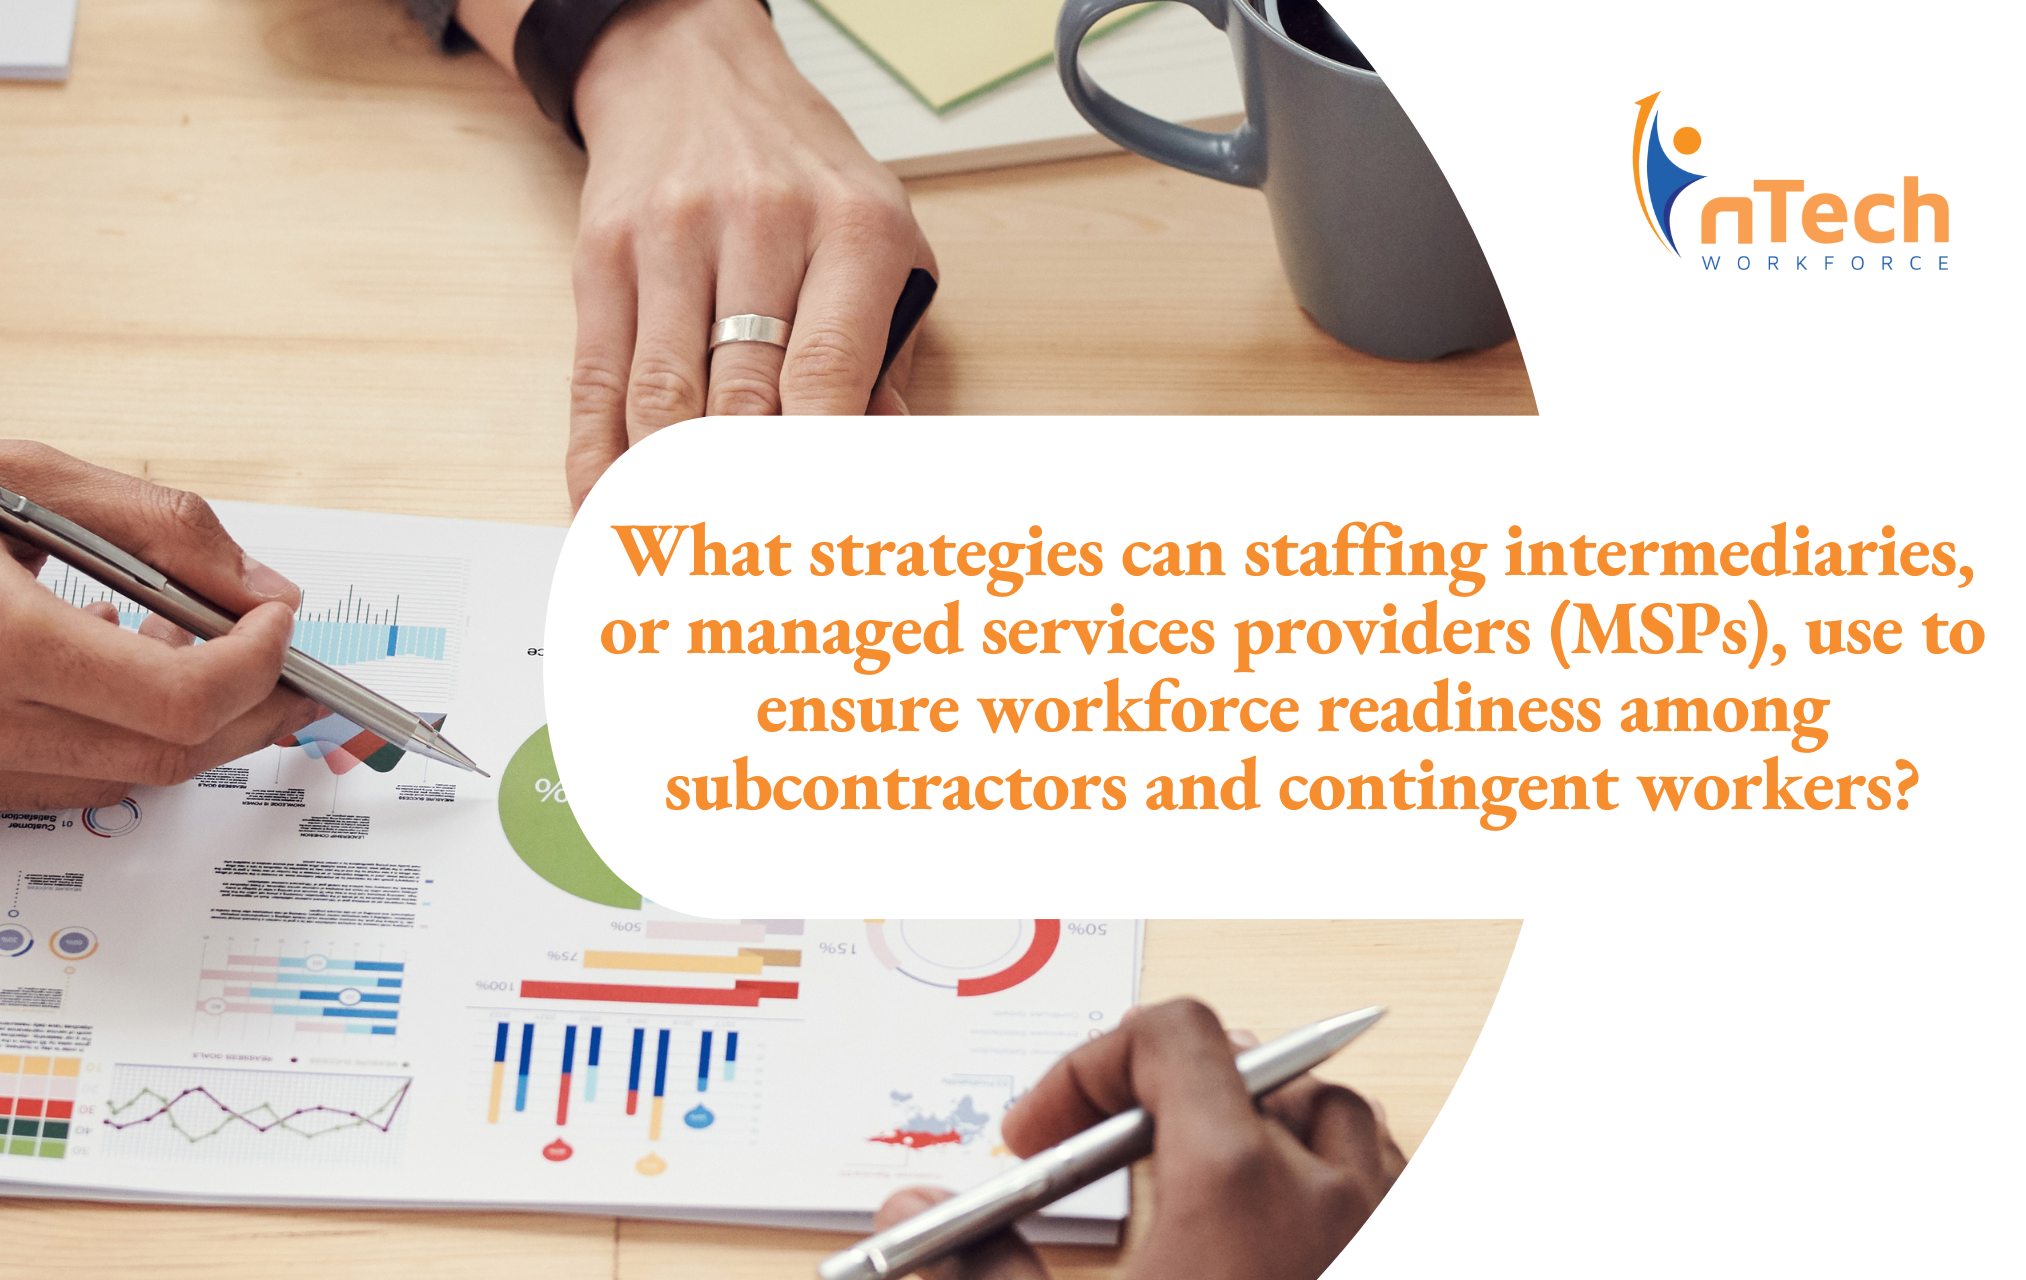 What strategies can staffing intermediaries, or managed services providers (MSPs), use to ensure workforce readiness among subcontractors and contingent workers?